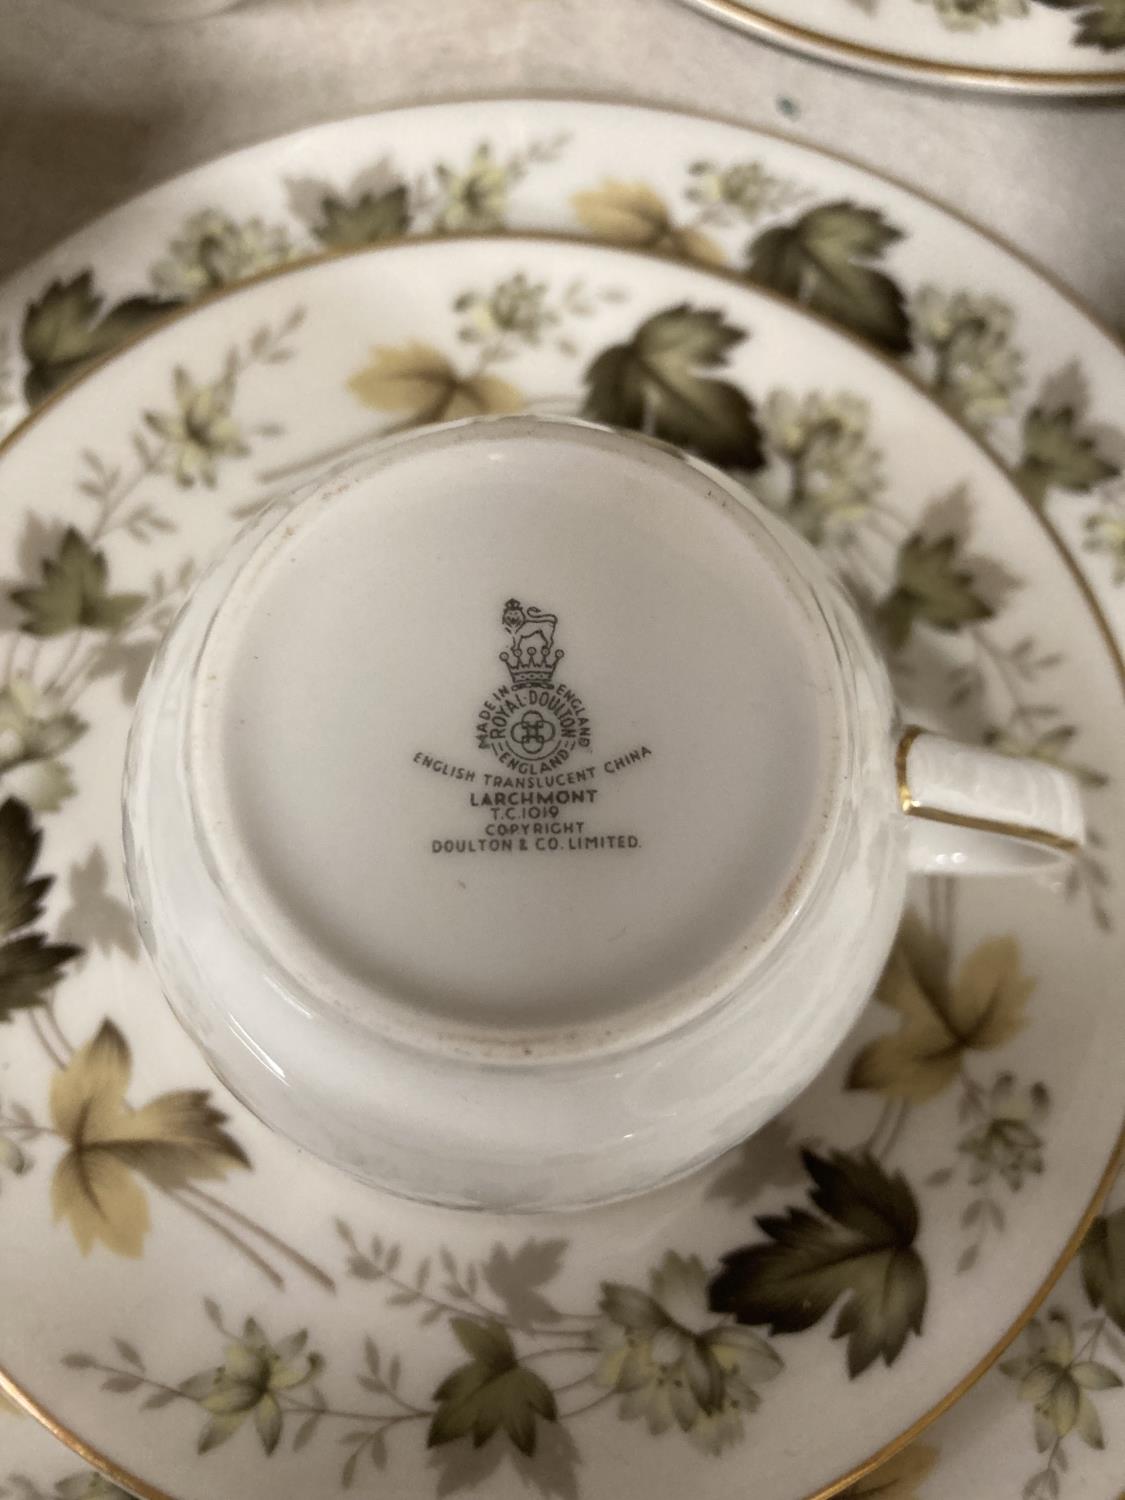 A ROYAL DOULTON 'LARCHMONT' DINNER SERVICE, TO INCLUDE VARIOUS SIZES OF PLATES, A SERVING TUREEN AND - Image 5 of 5